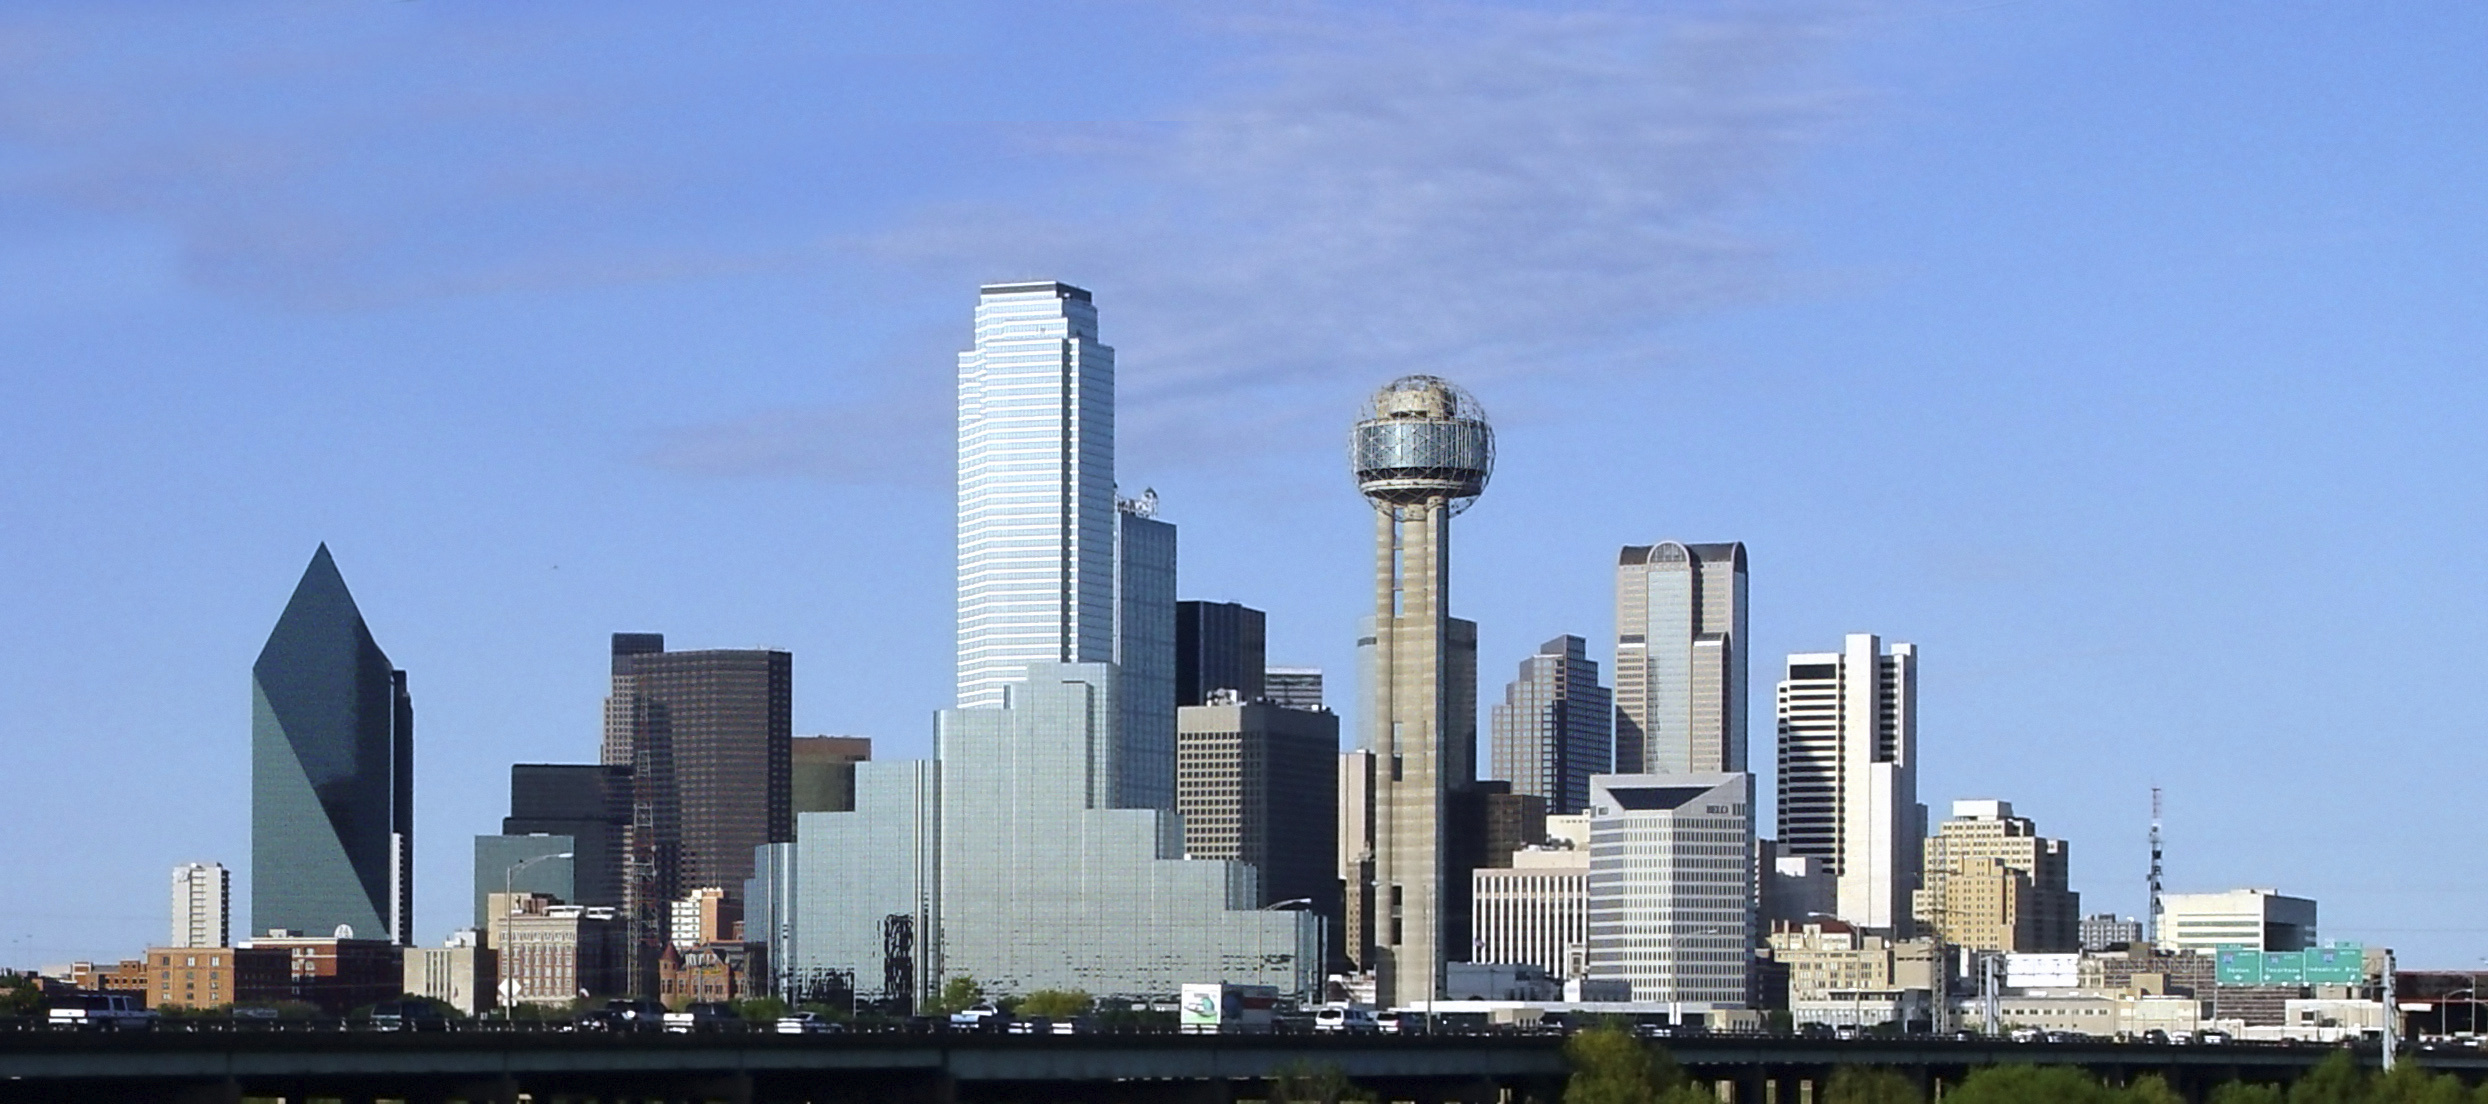 Dallas skyline, Real estate, Chester law, Property investments, 2490x1110 Dual Screen Desktop